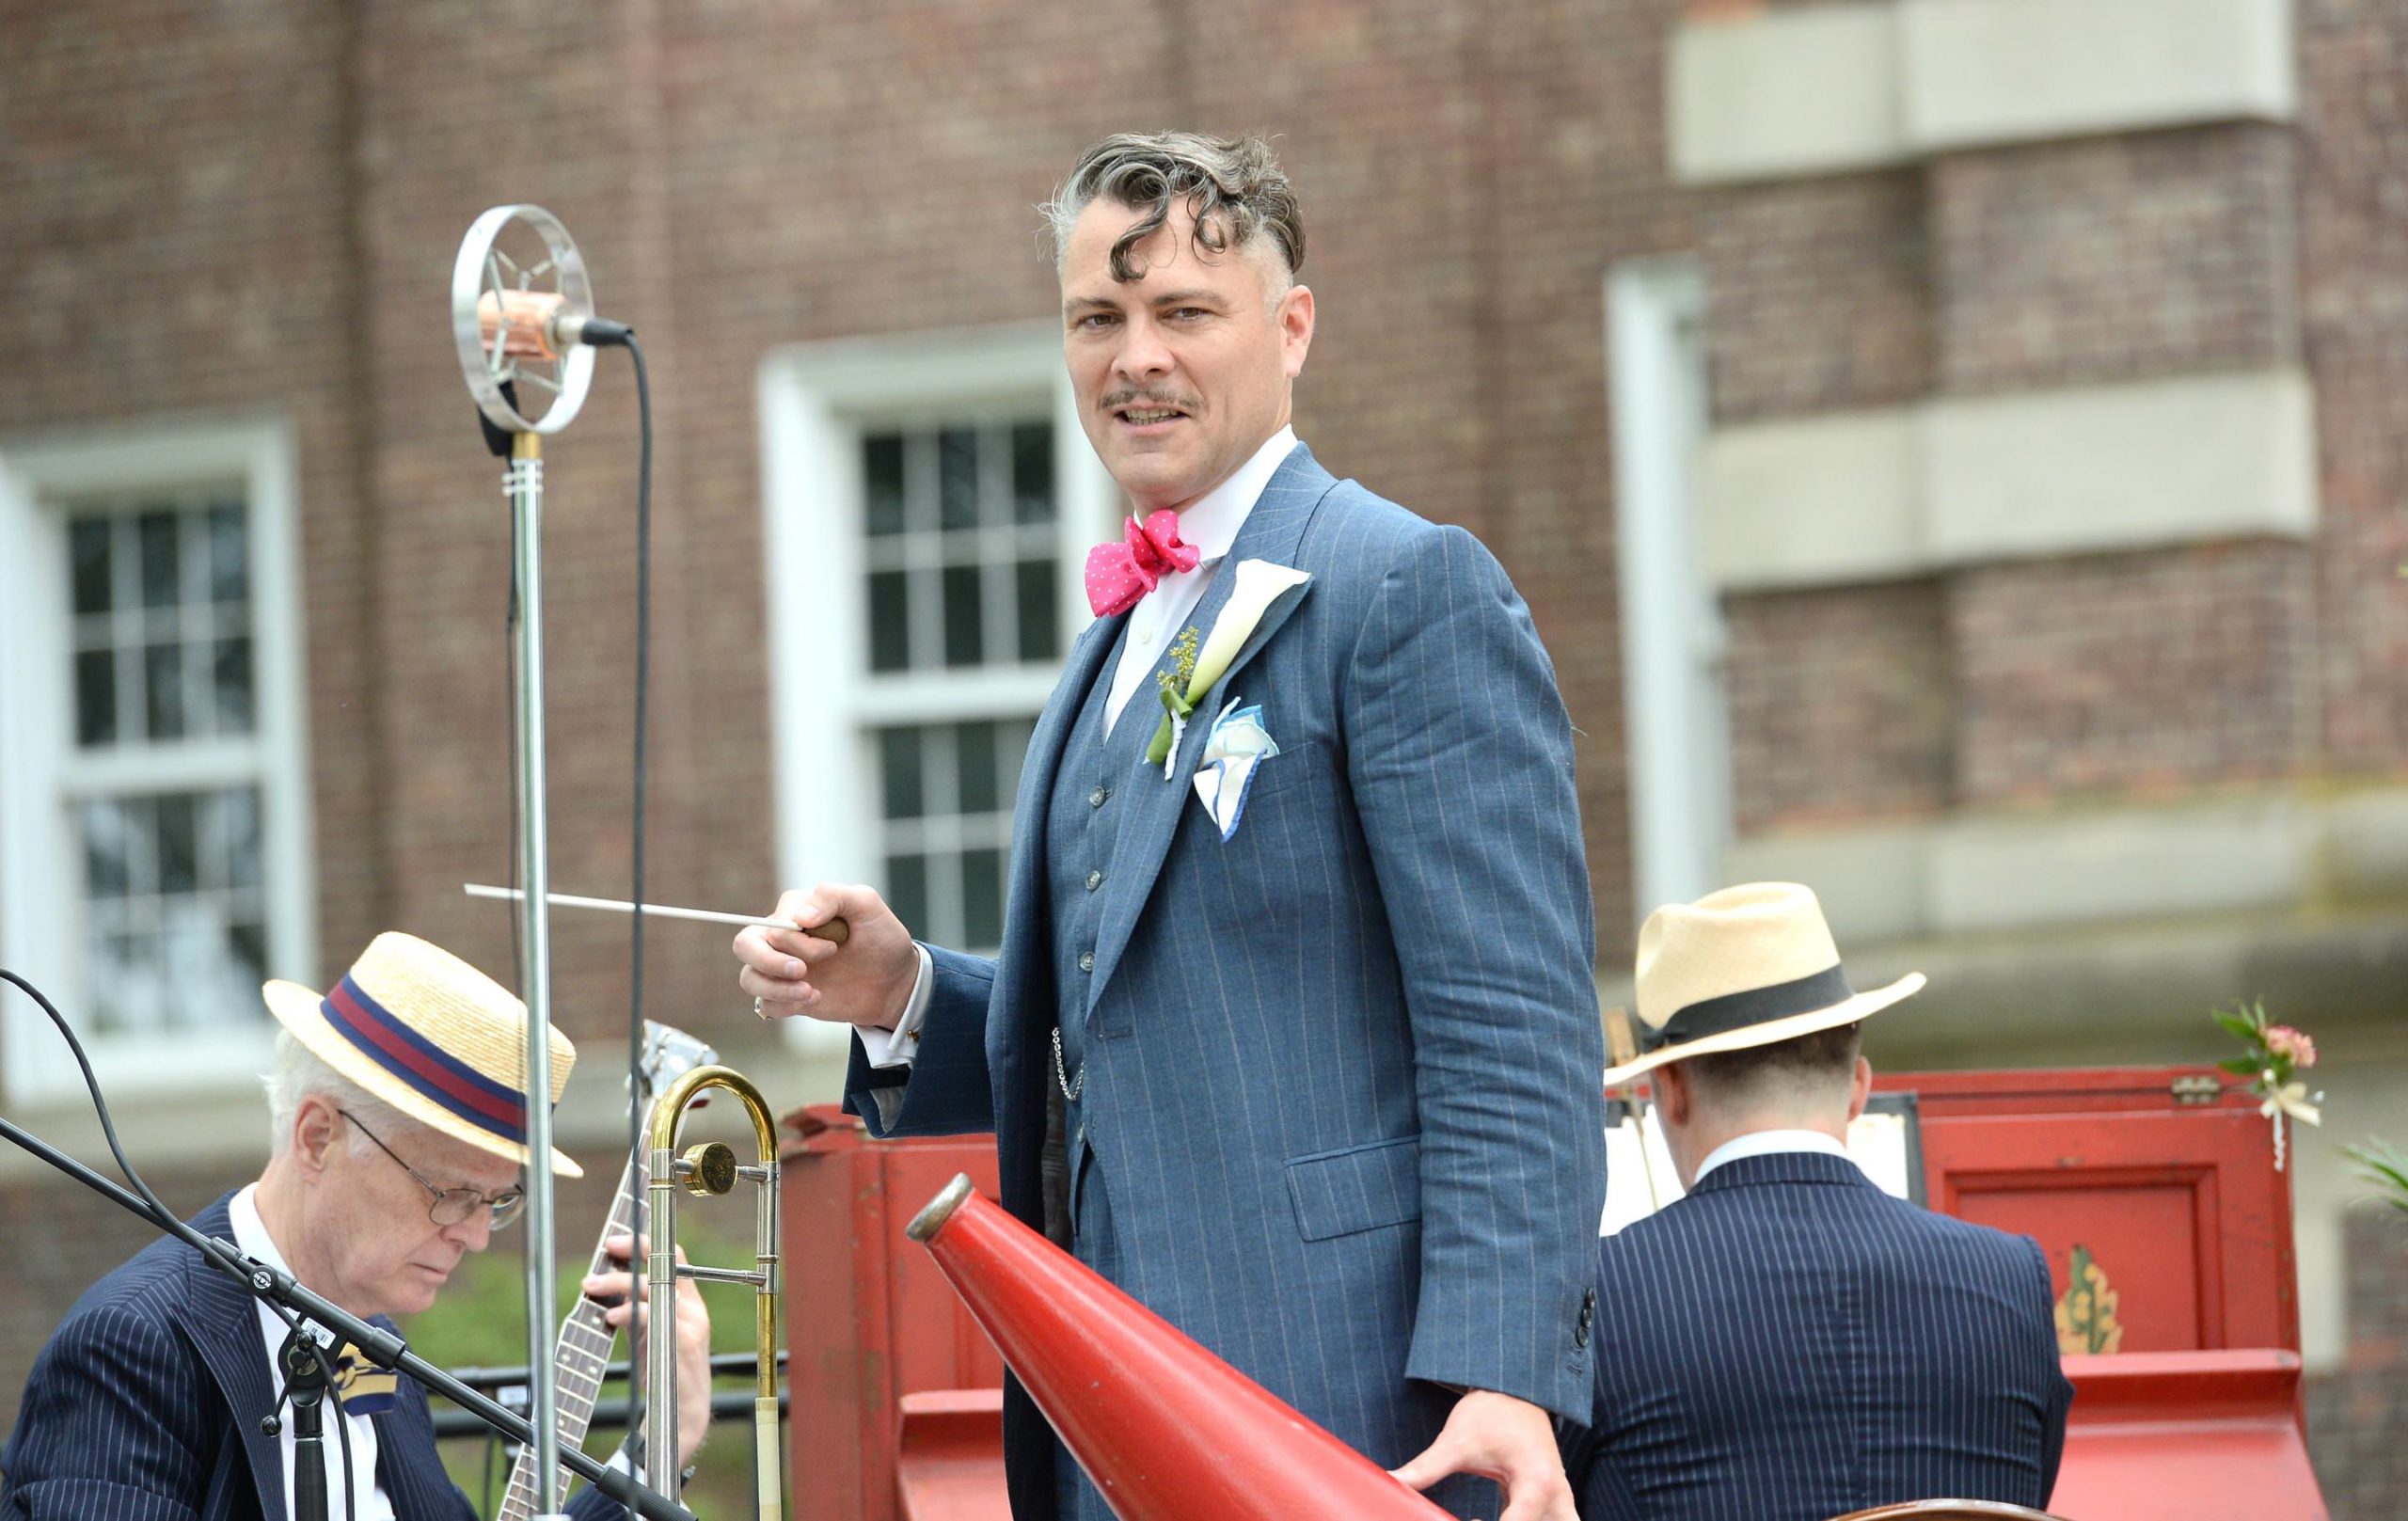 11th Annual Jazz Age Lawn Party Sponsored By St-Germain